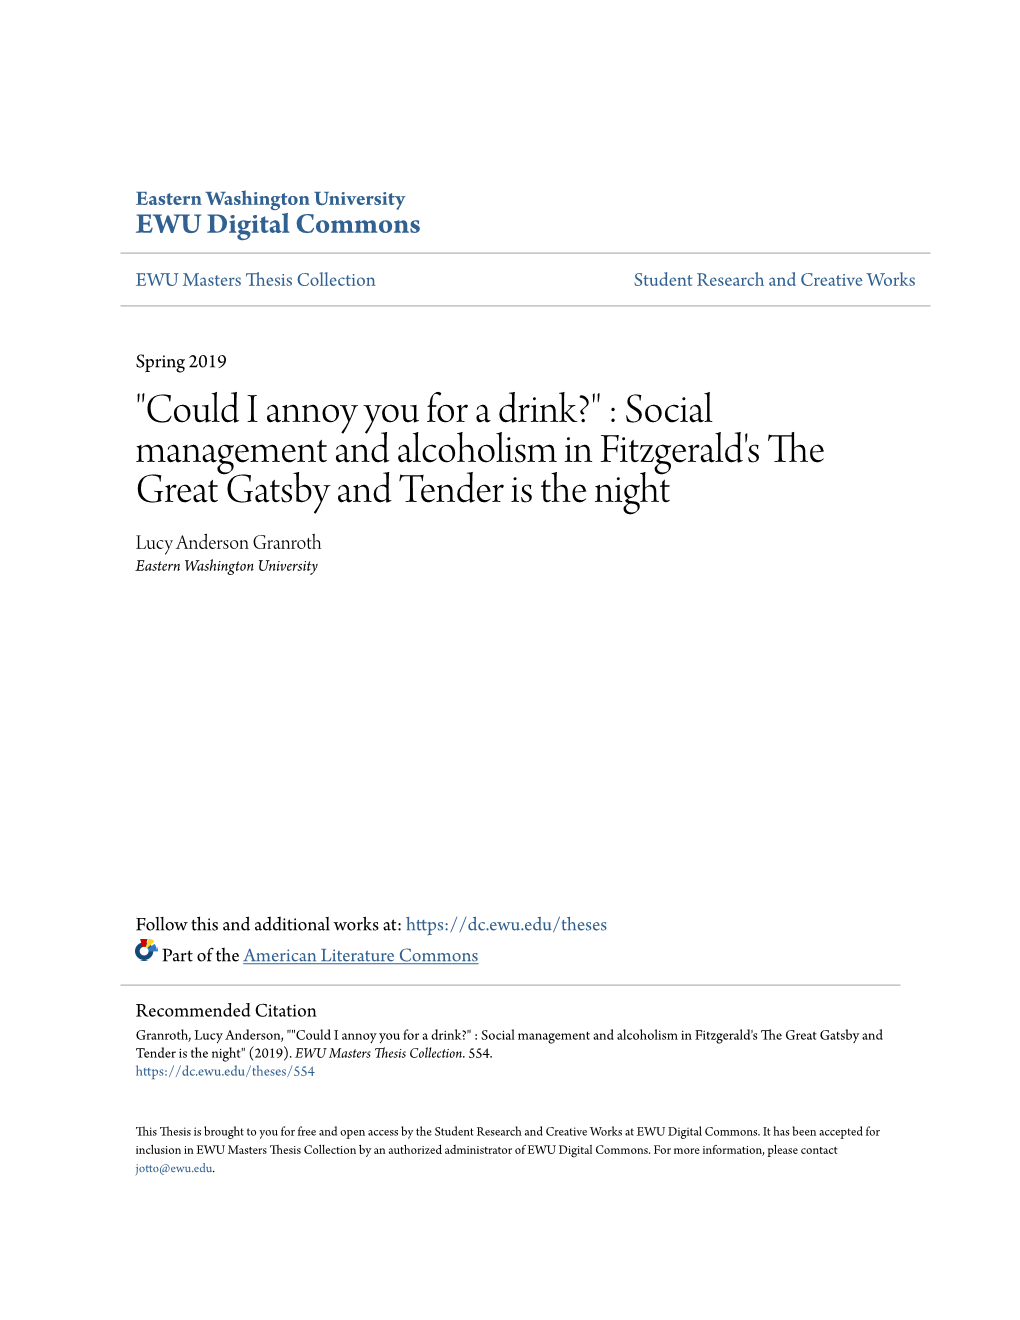 Social Management and Alcoholism in Fitzgerald's the Great Gatsby and Tender Is the Night Lucy Anderson Granroth Eastern Washington University